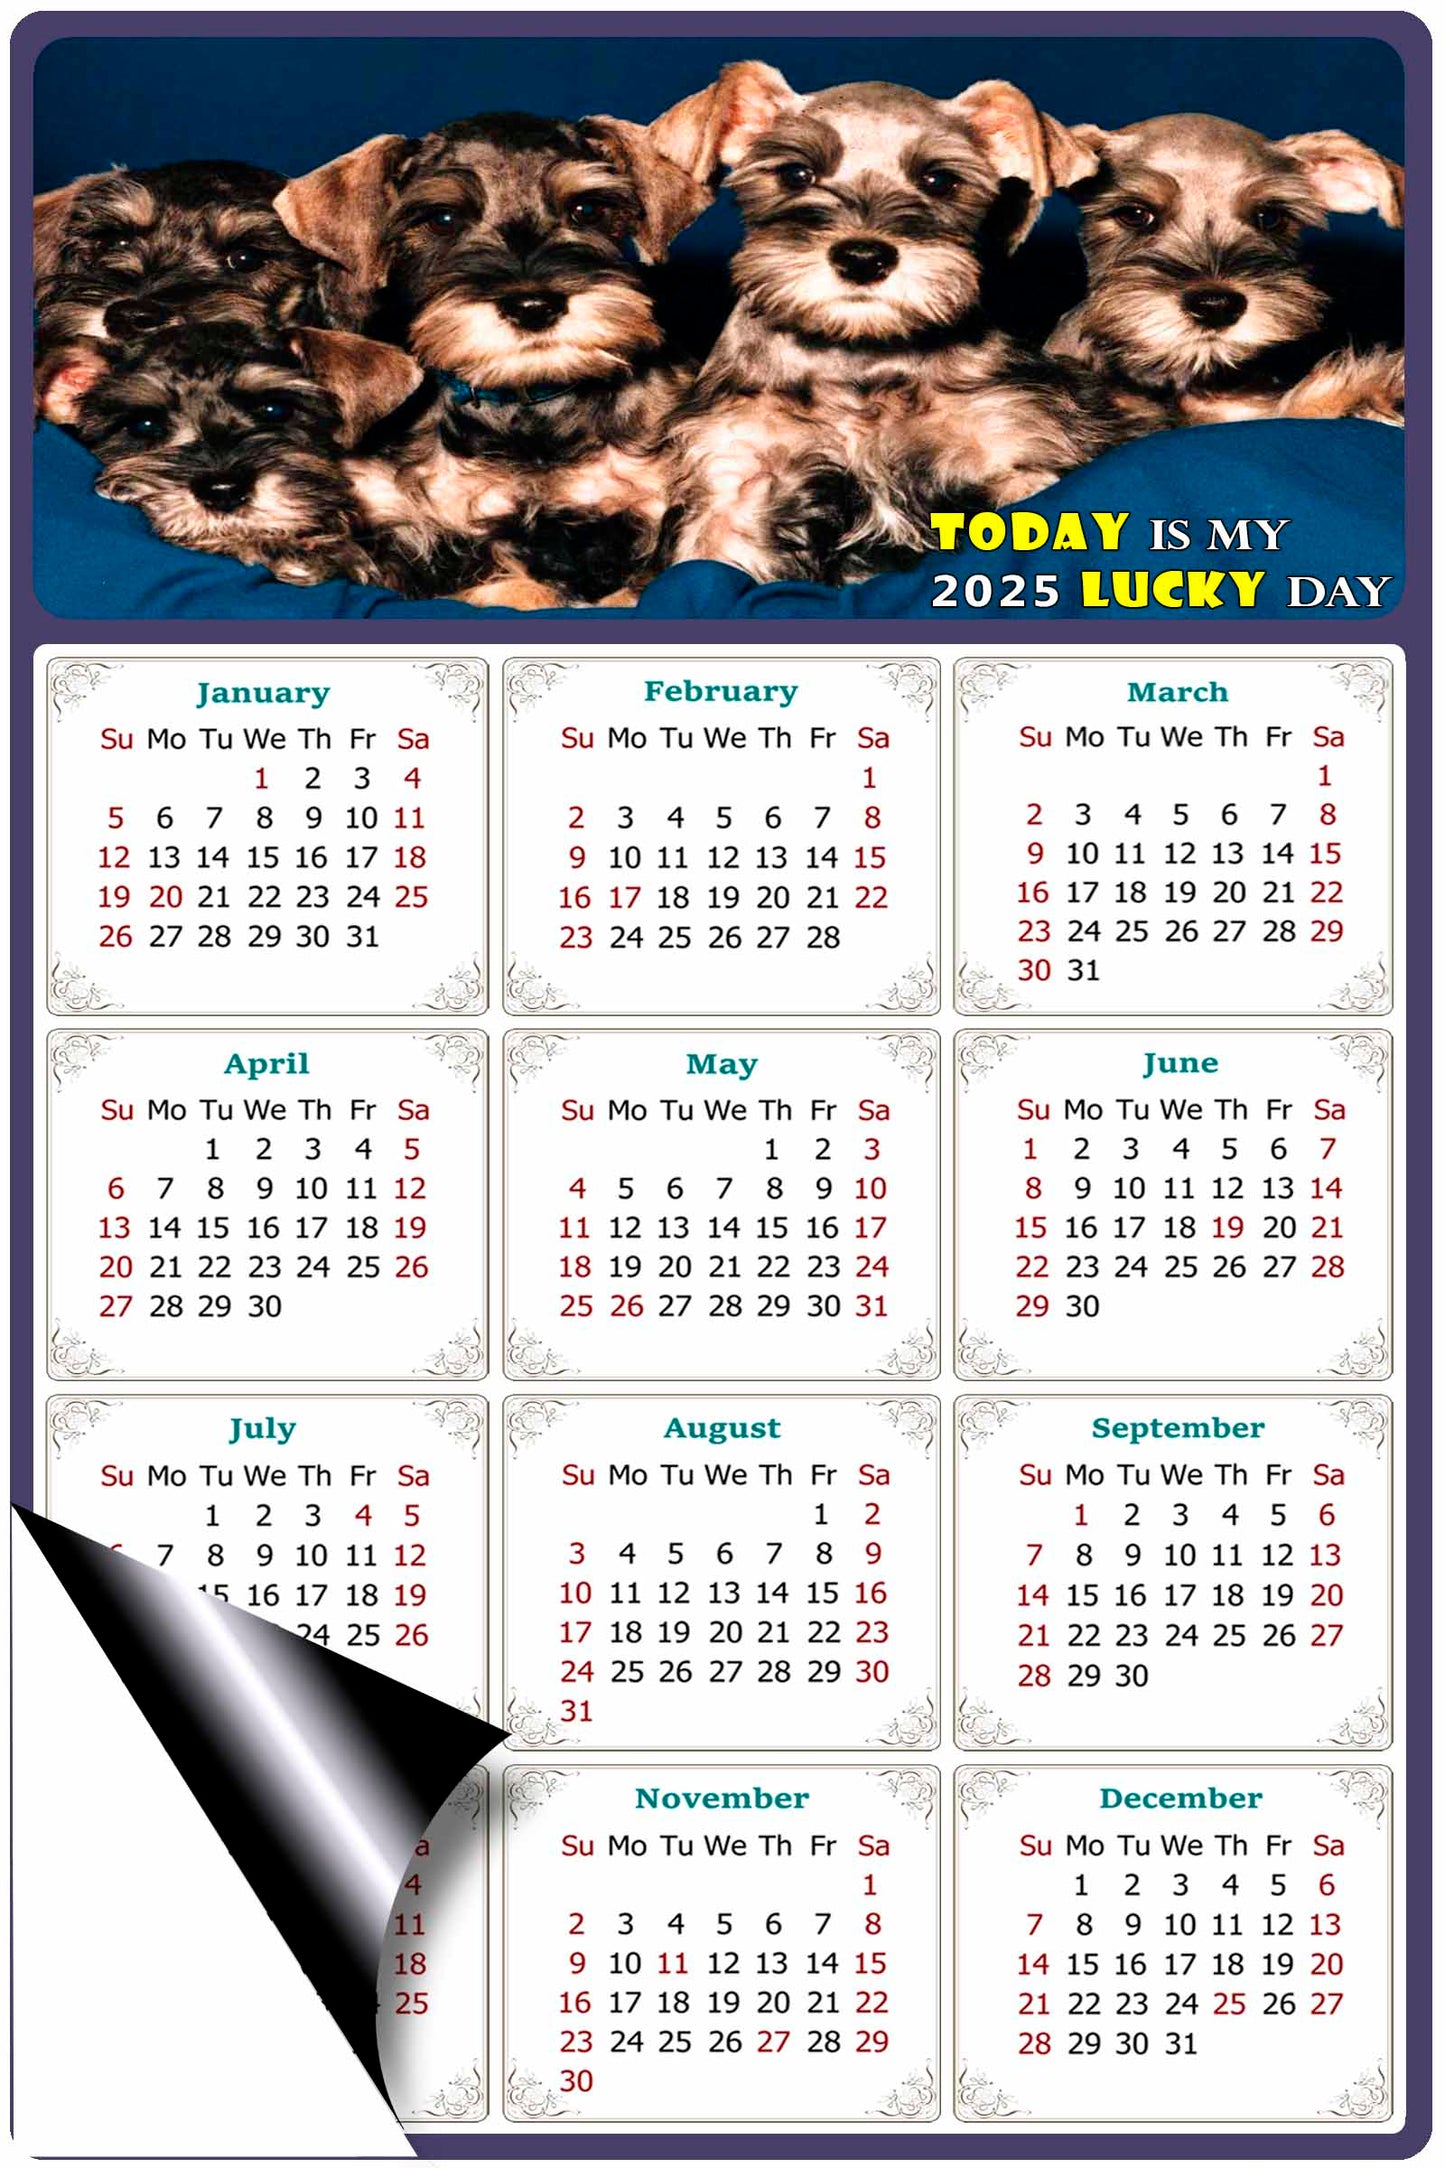 2025 Magnetic Calendar - Today is My Lucky Day (Fade, Tear, and Water Resistant)- Dogs Themed 08